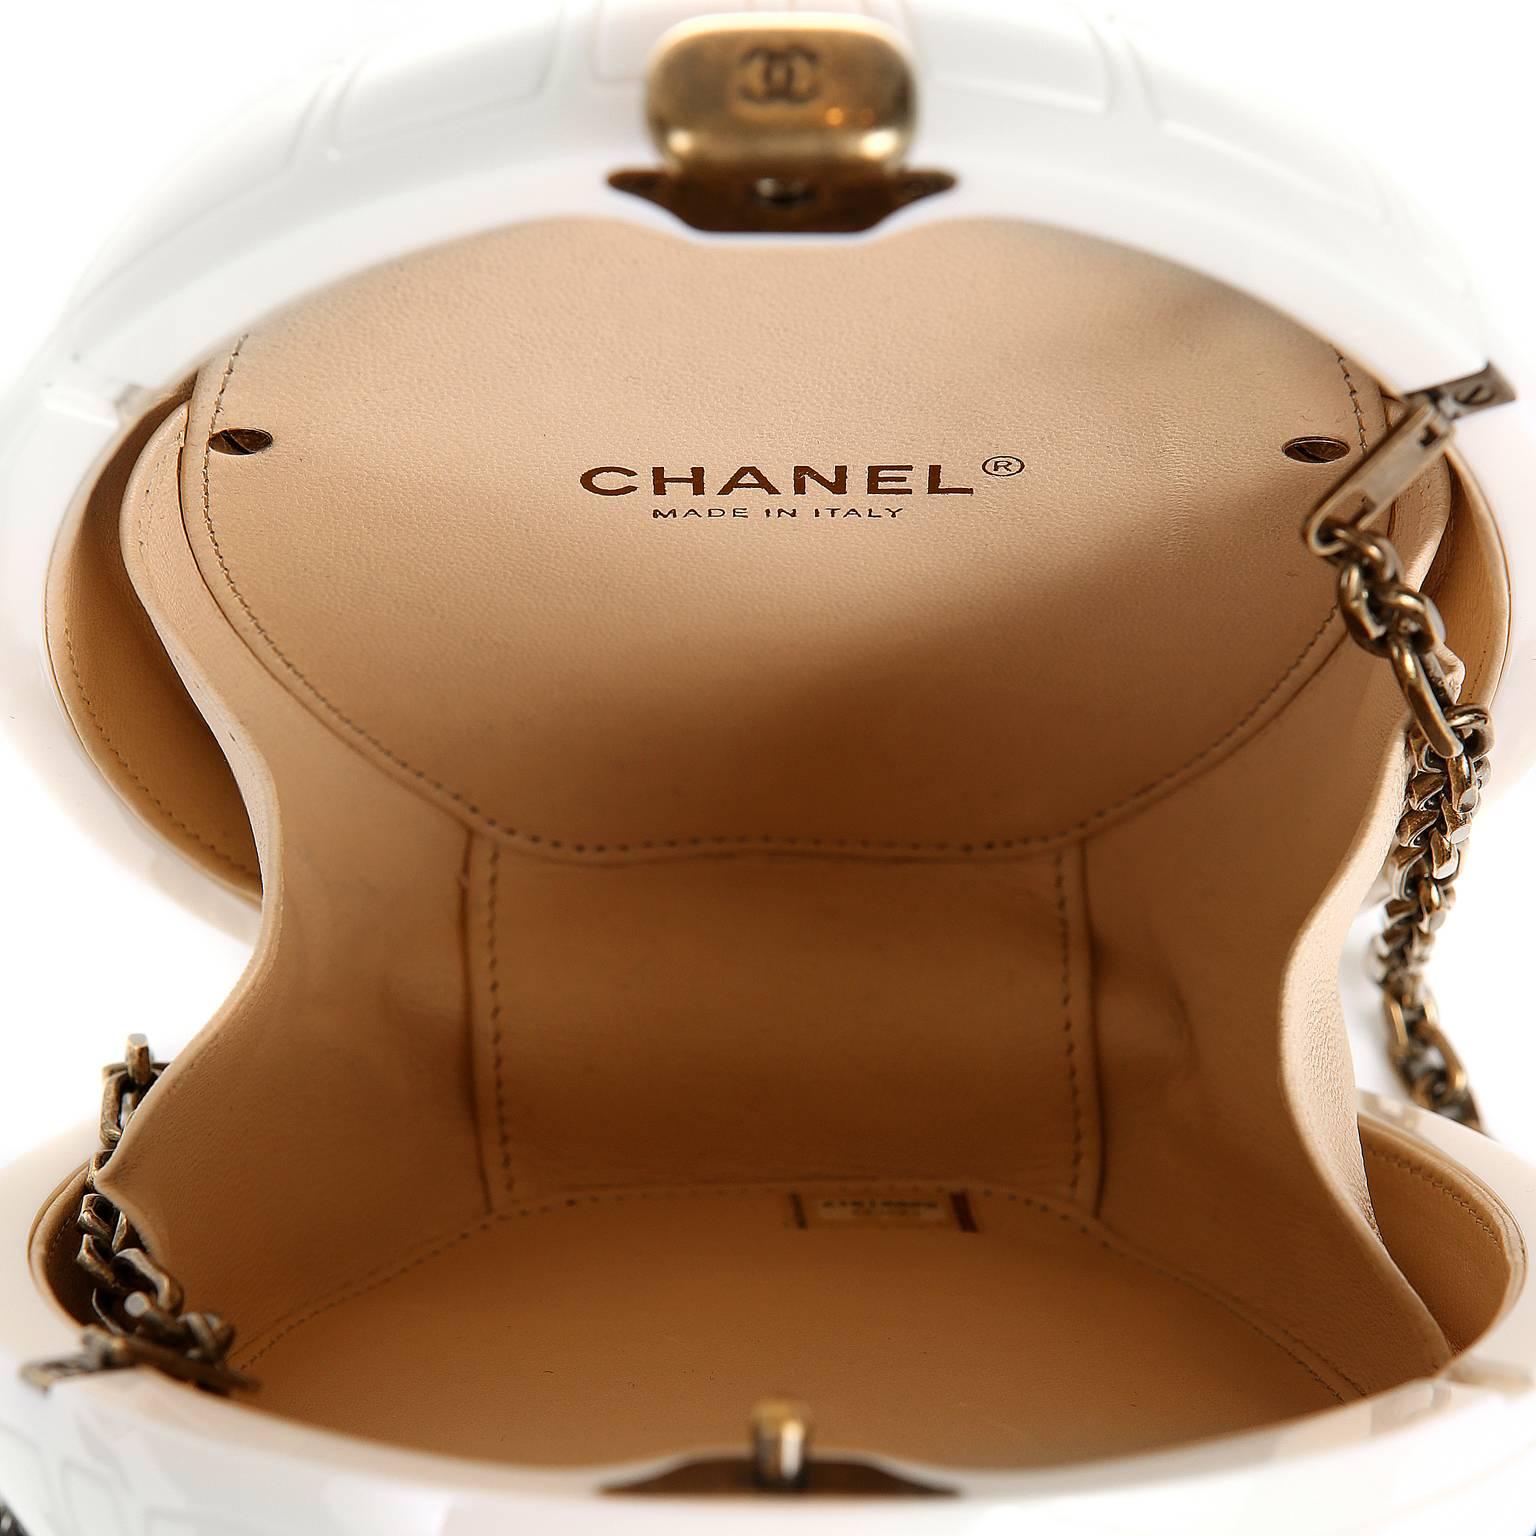 Chanel Ivory Resin Turtle Shell Print Bag with Strap- 2016 CRUISE For Sale 3